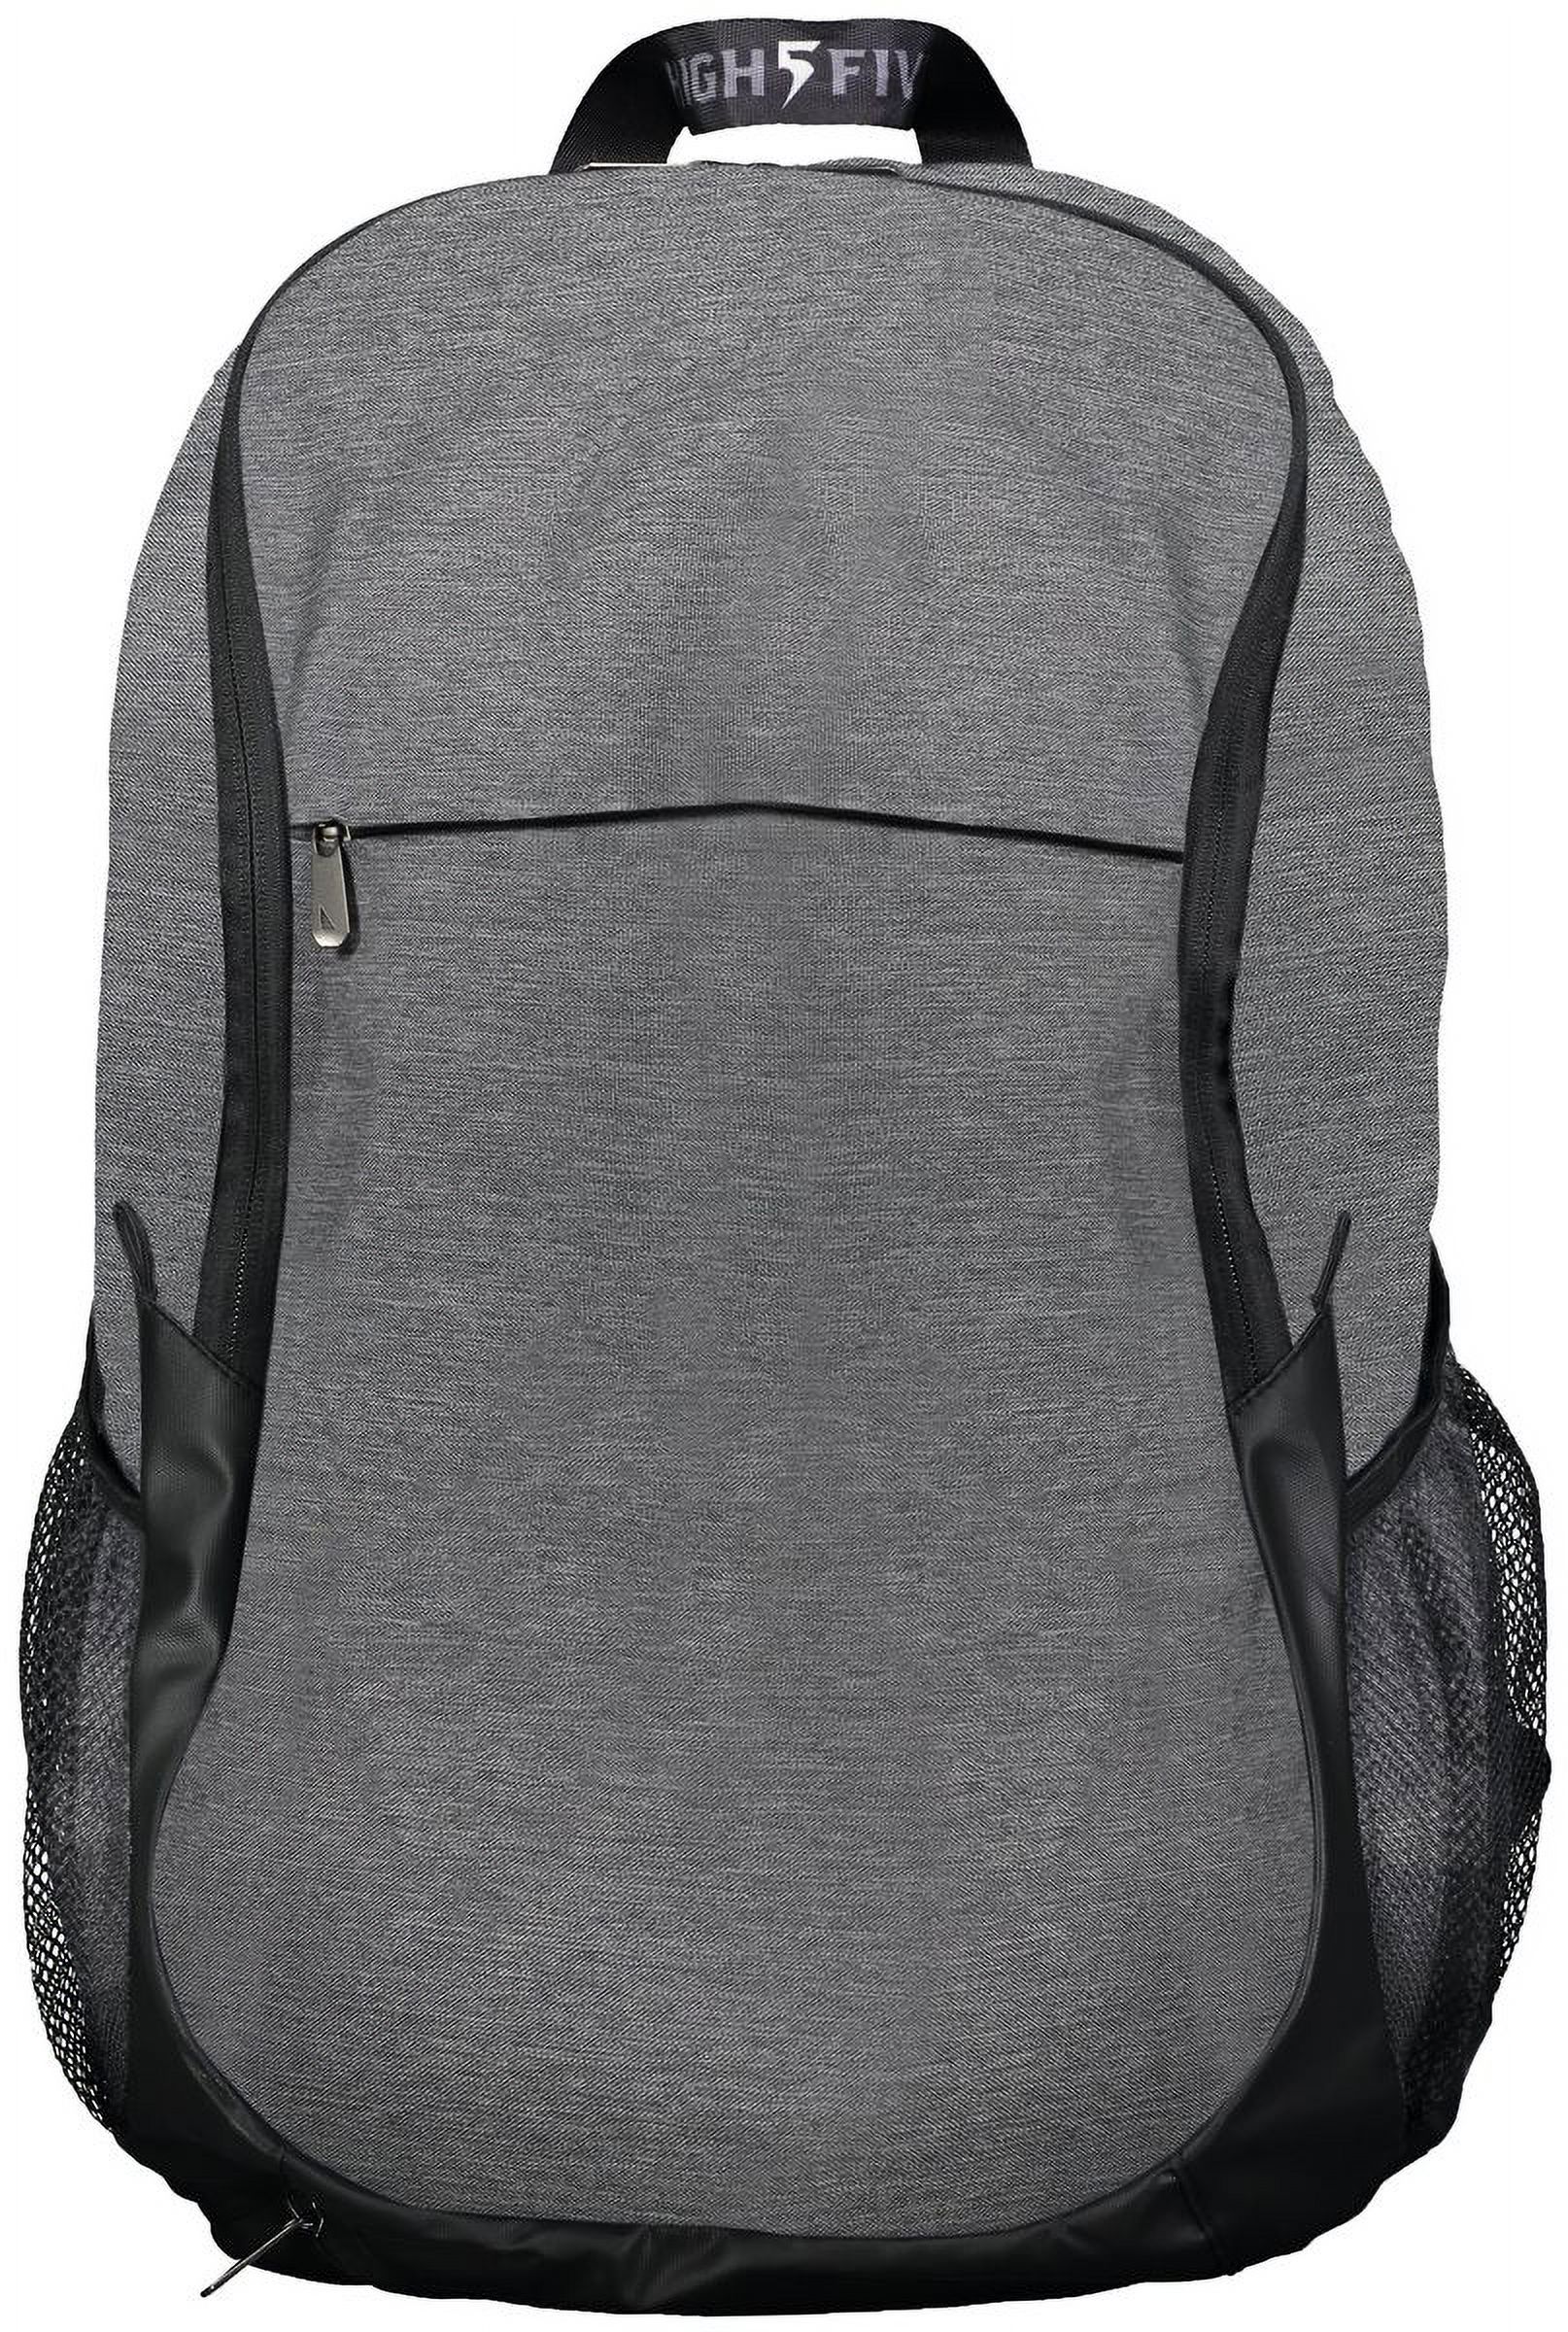 High Five 327895.E83.OS Free Form Backpack, Carbon Heather - One Size - image 2 of 5